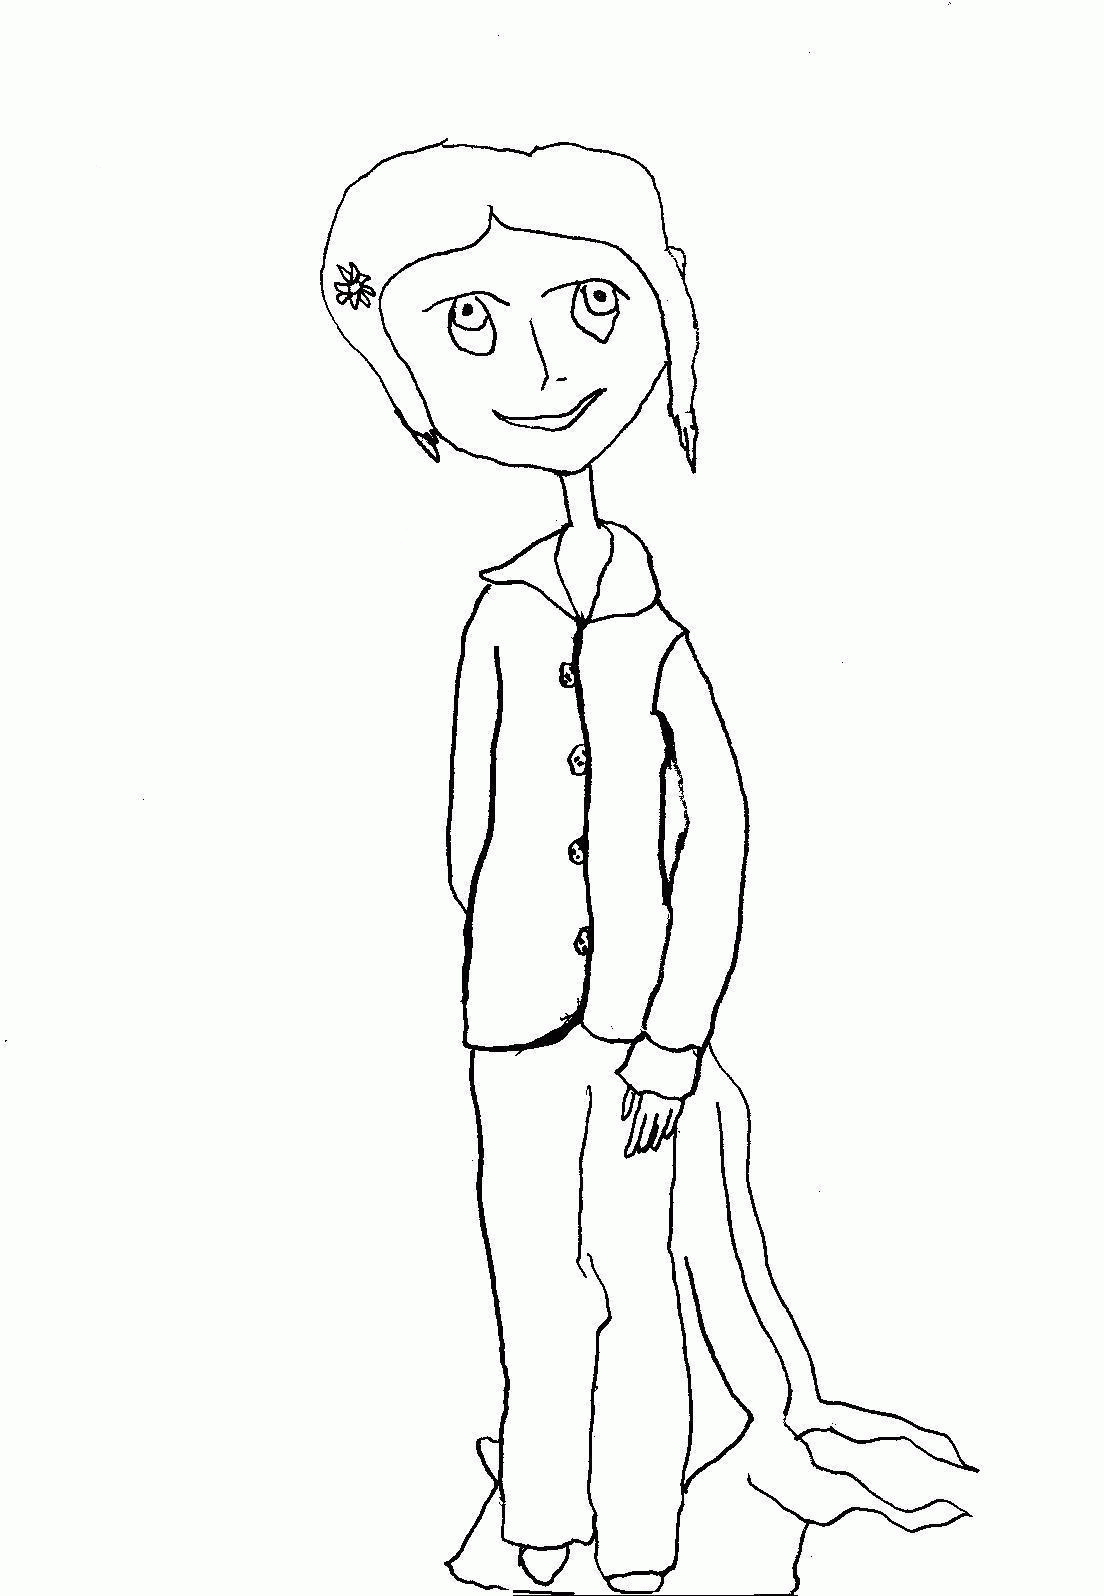 coraline-coloring-page-0007-q1